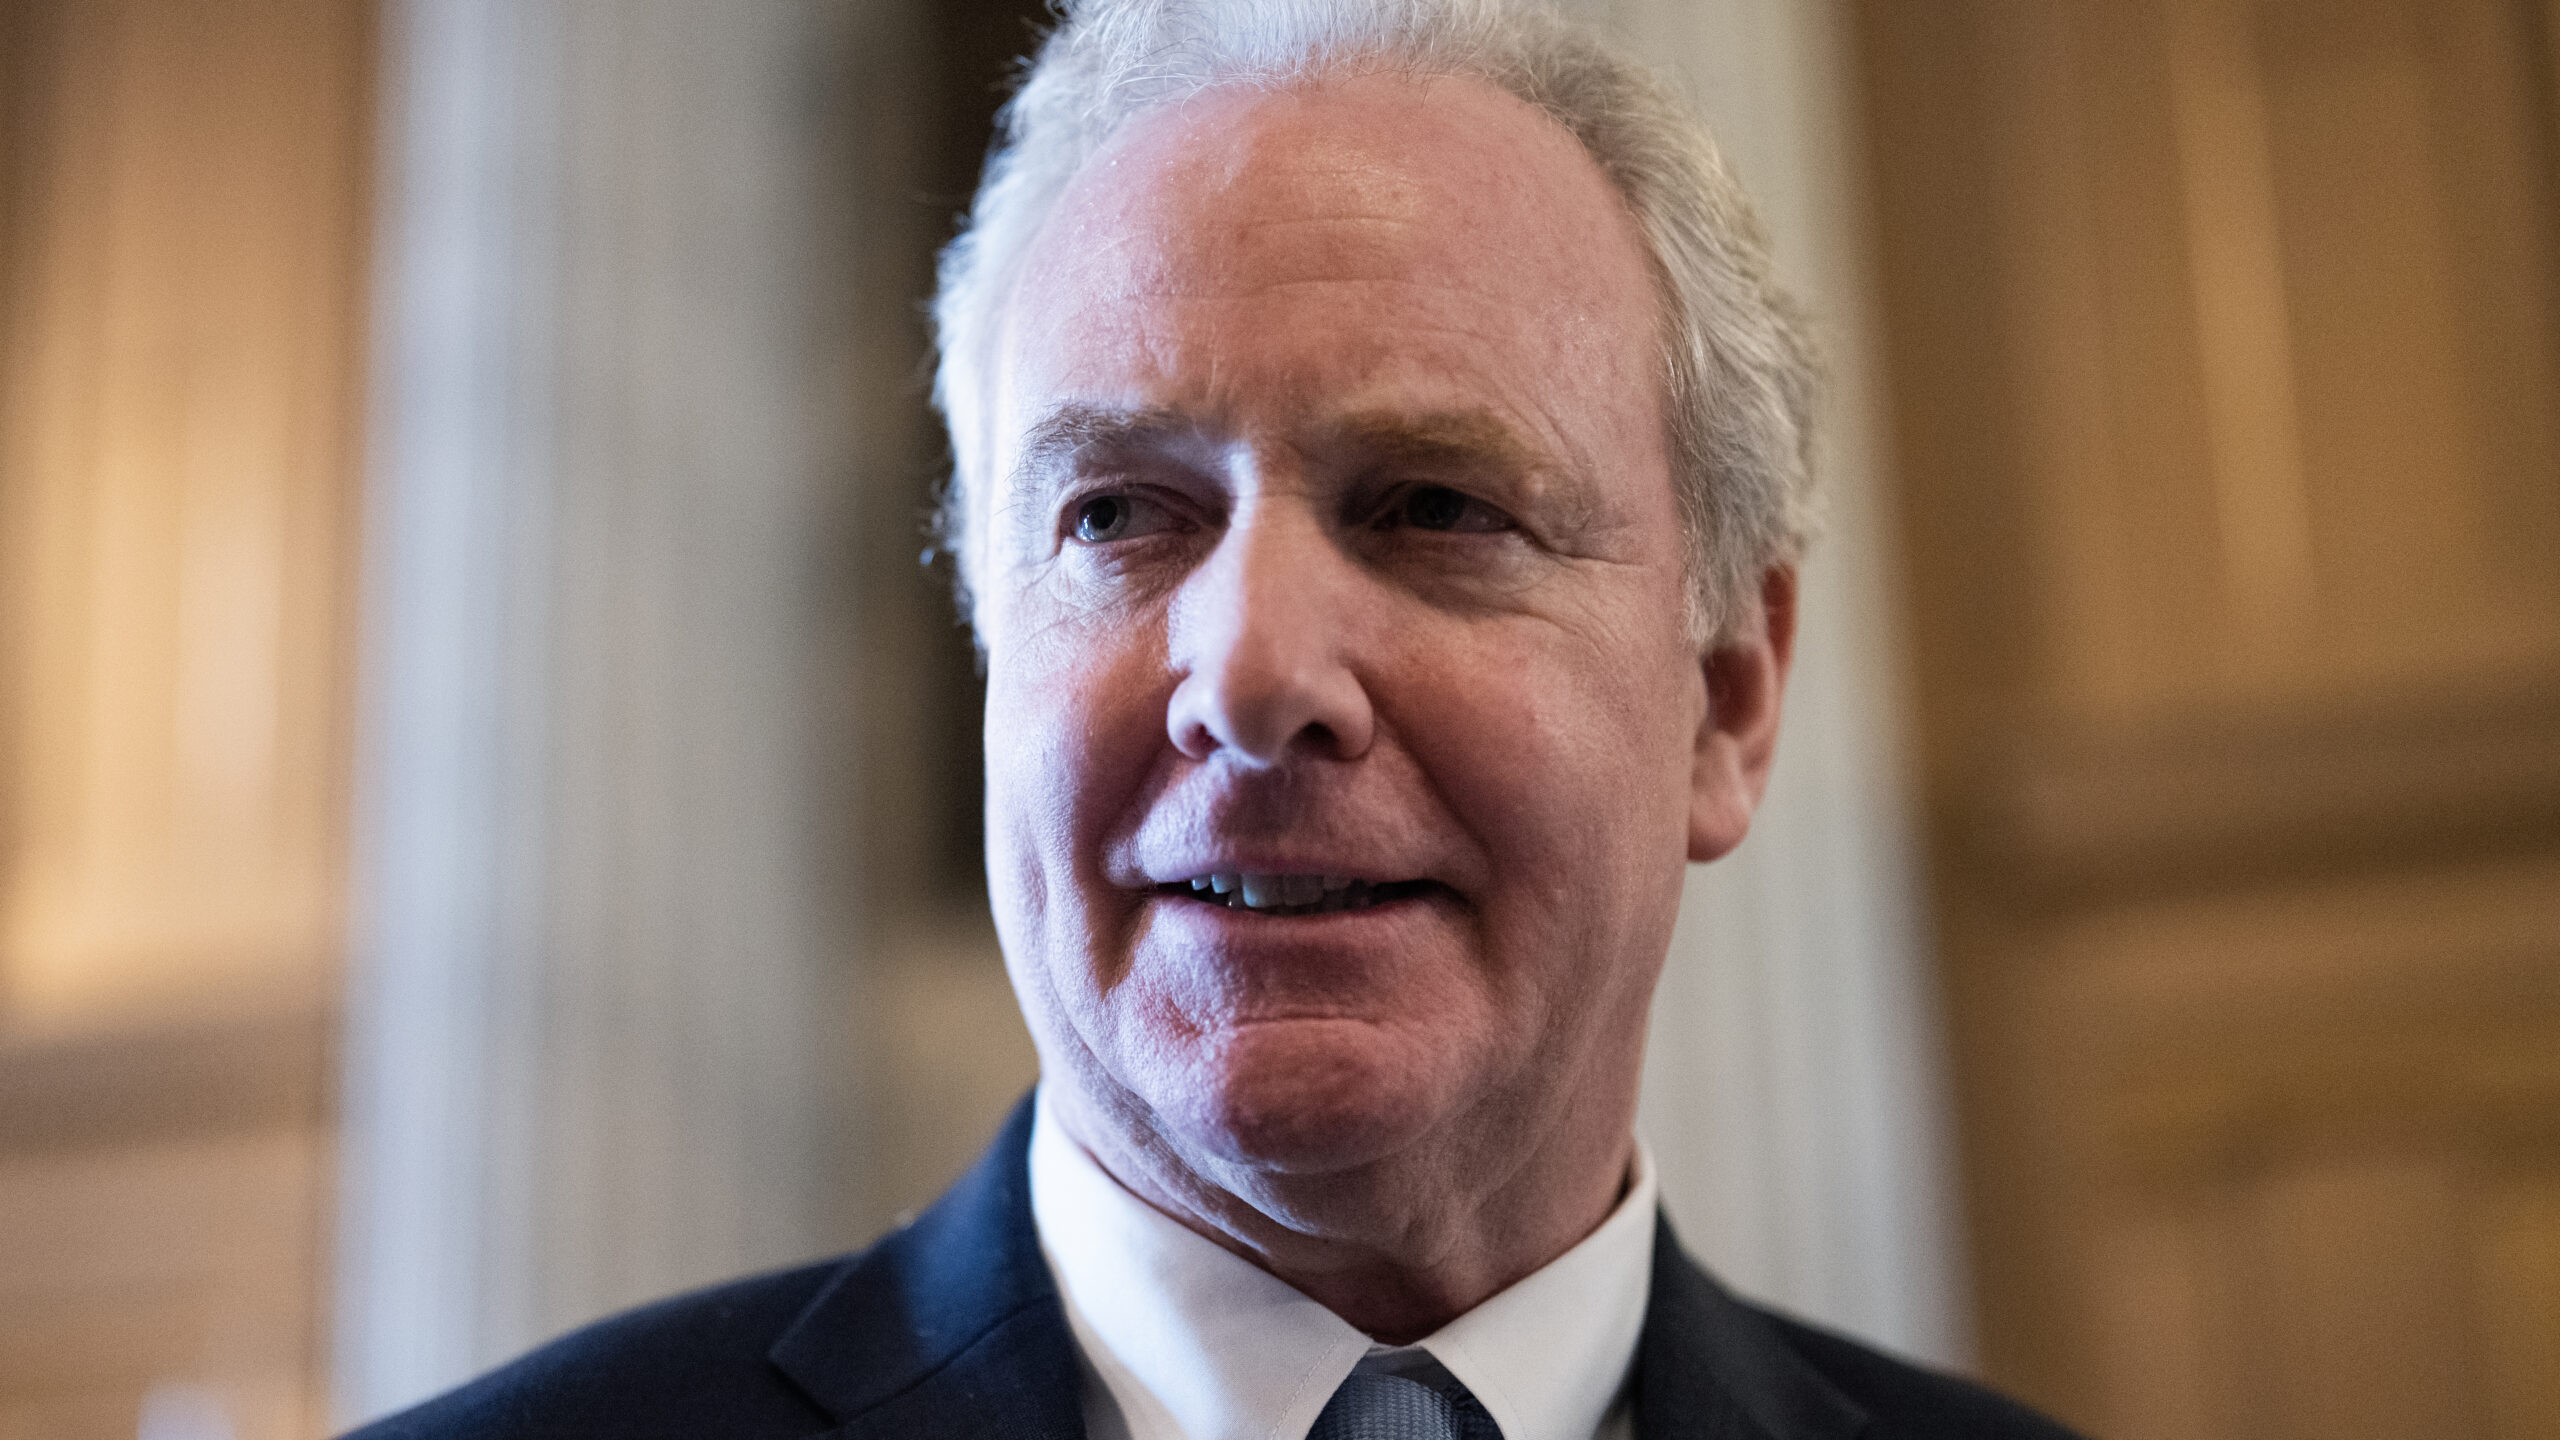 Maryland Senator Chris Van Hollen stated that all victims of the bridge collapse were migrants